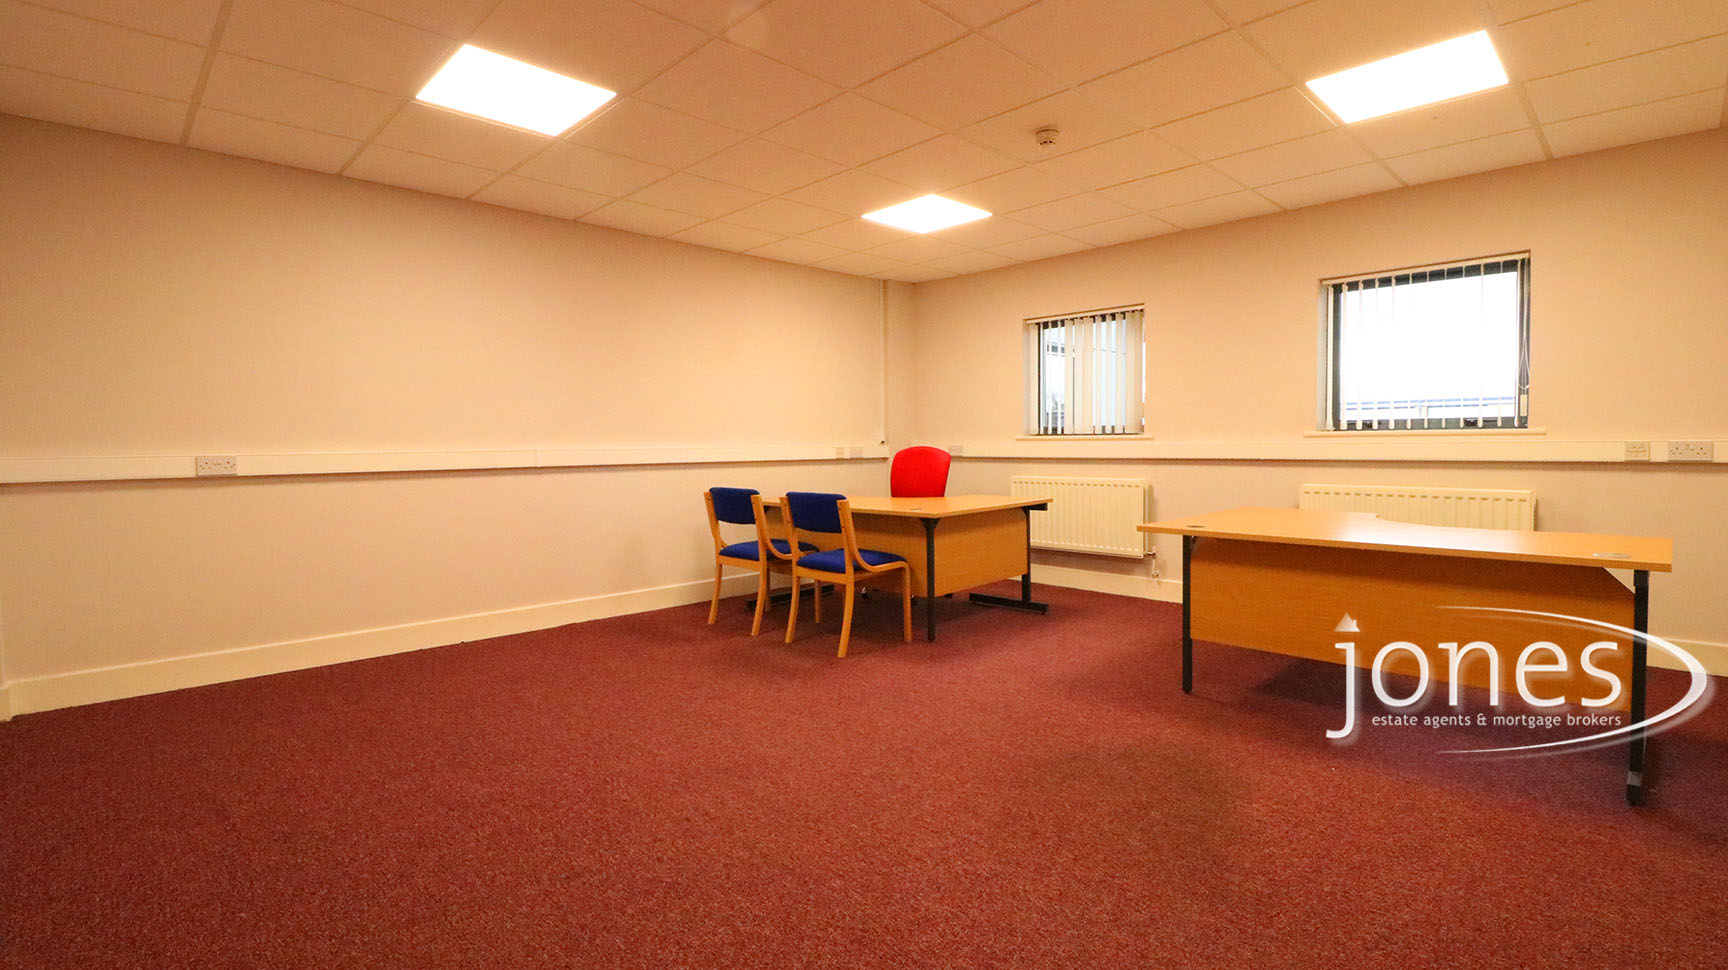 Home for Sale Let - Photo 07 Durham Tees Valley Business Centre, Orde Wingate Way,Stockton on Tees, TS19